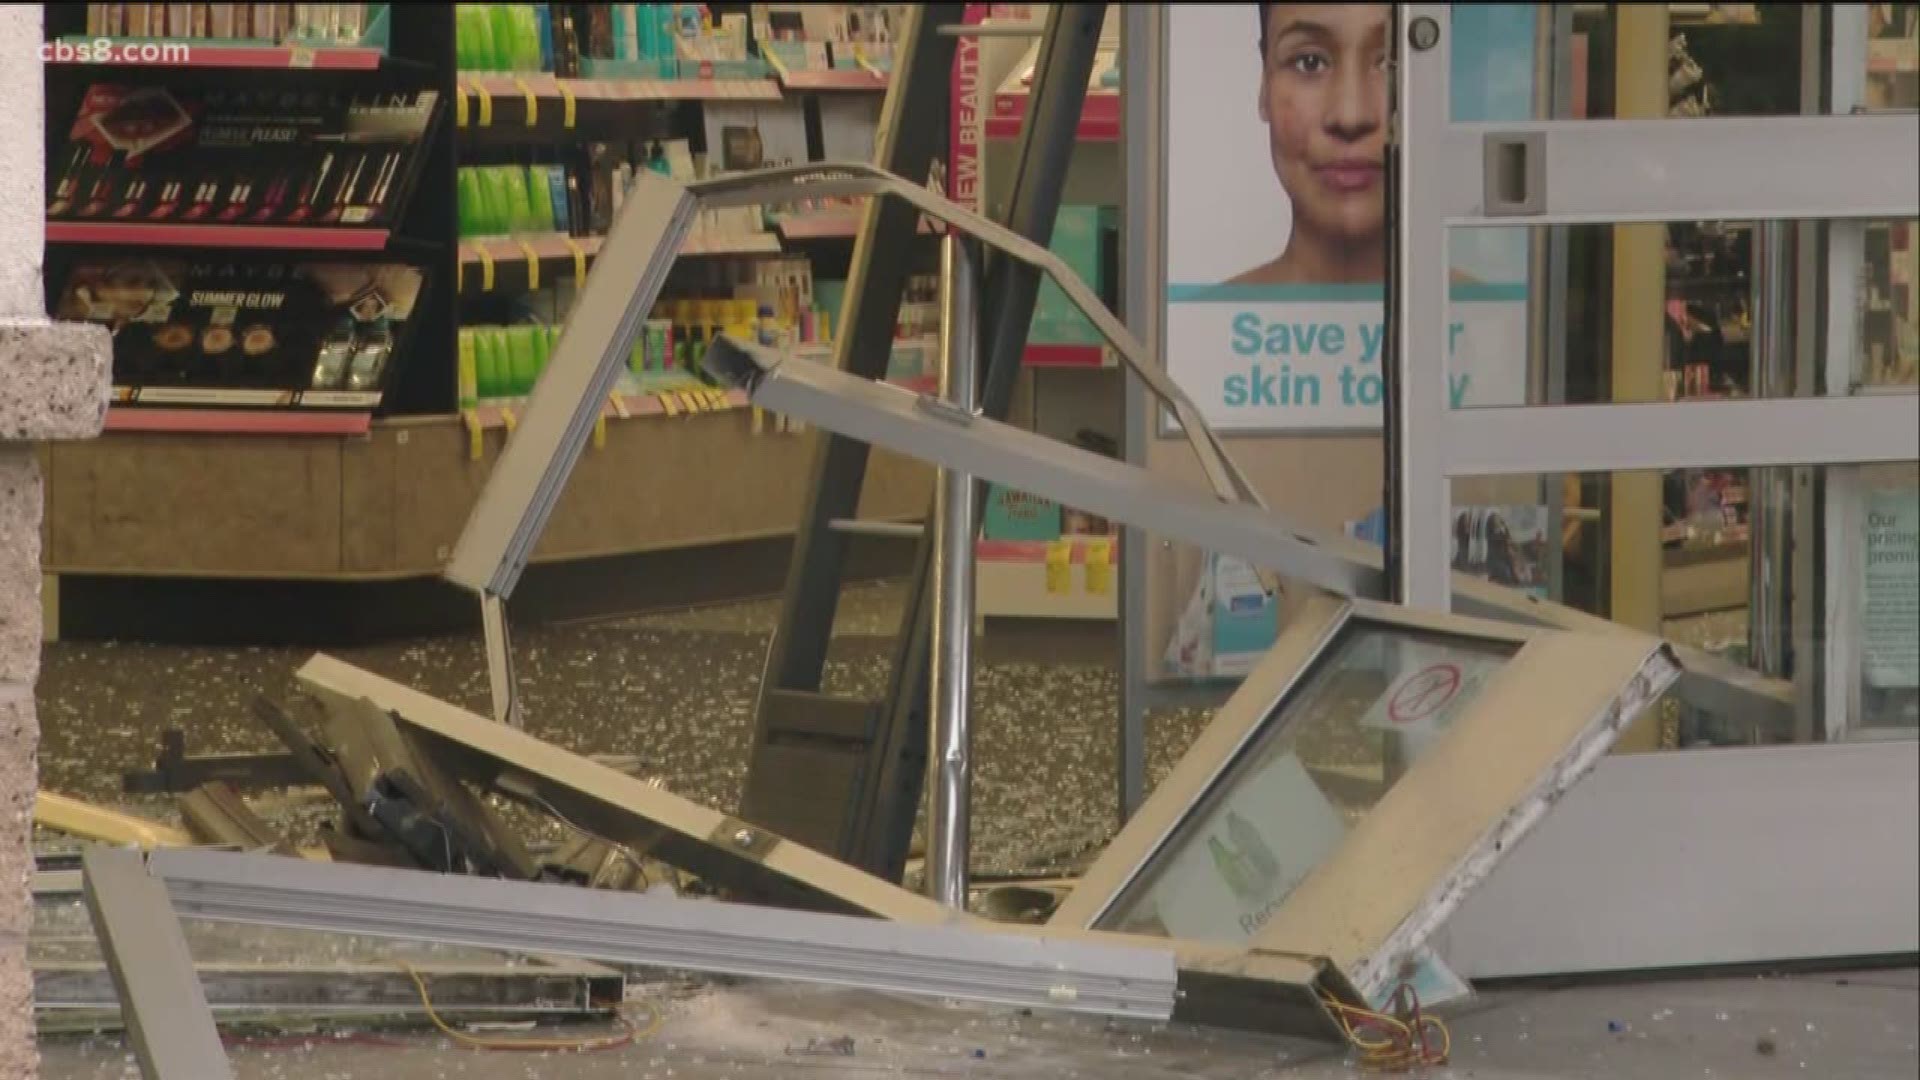 According to police, a silver pickup truck crashed through the front of the store where two employees were inside.